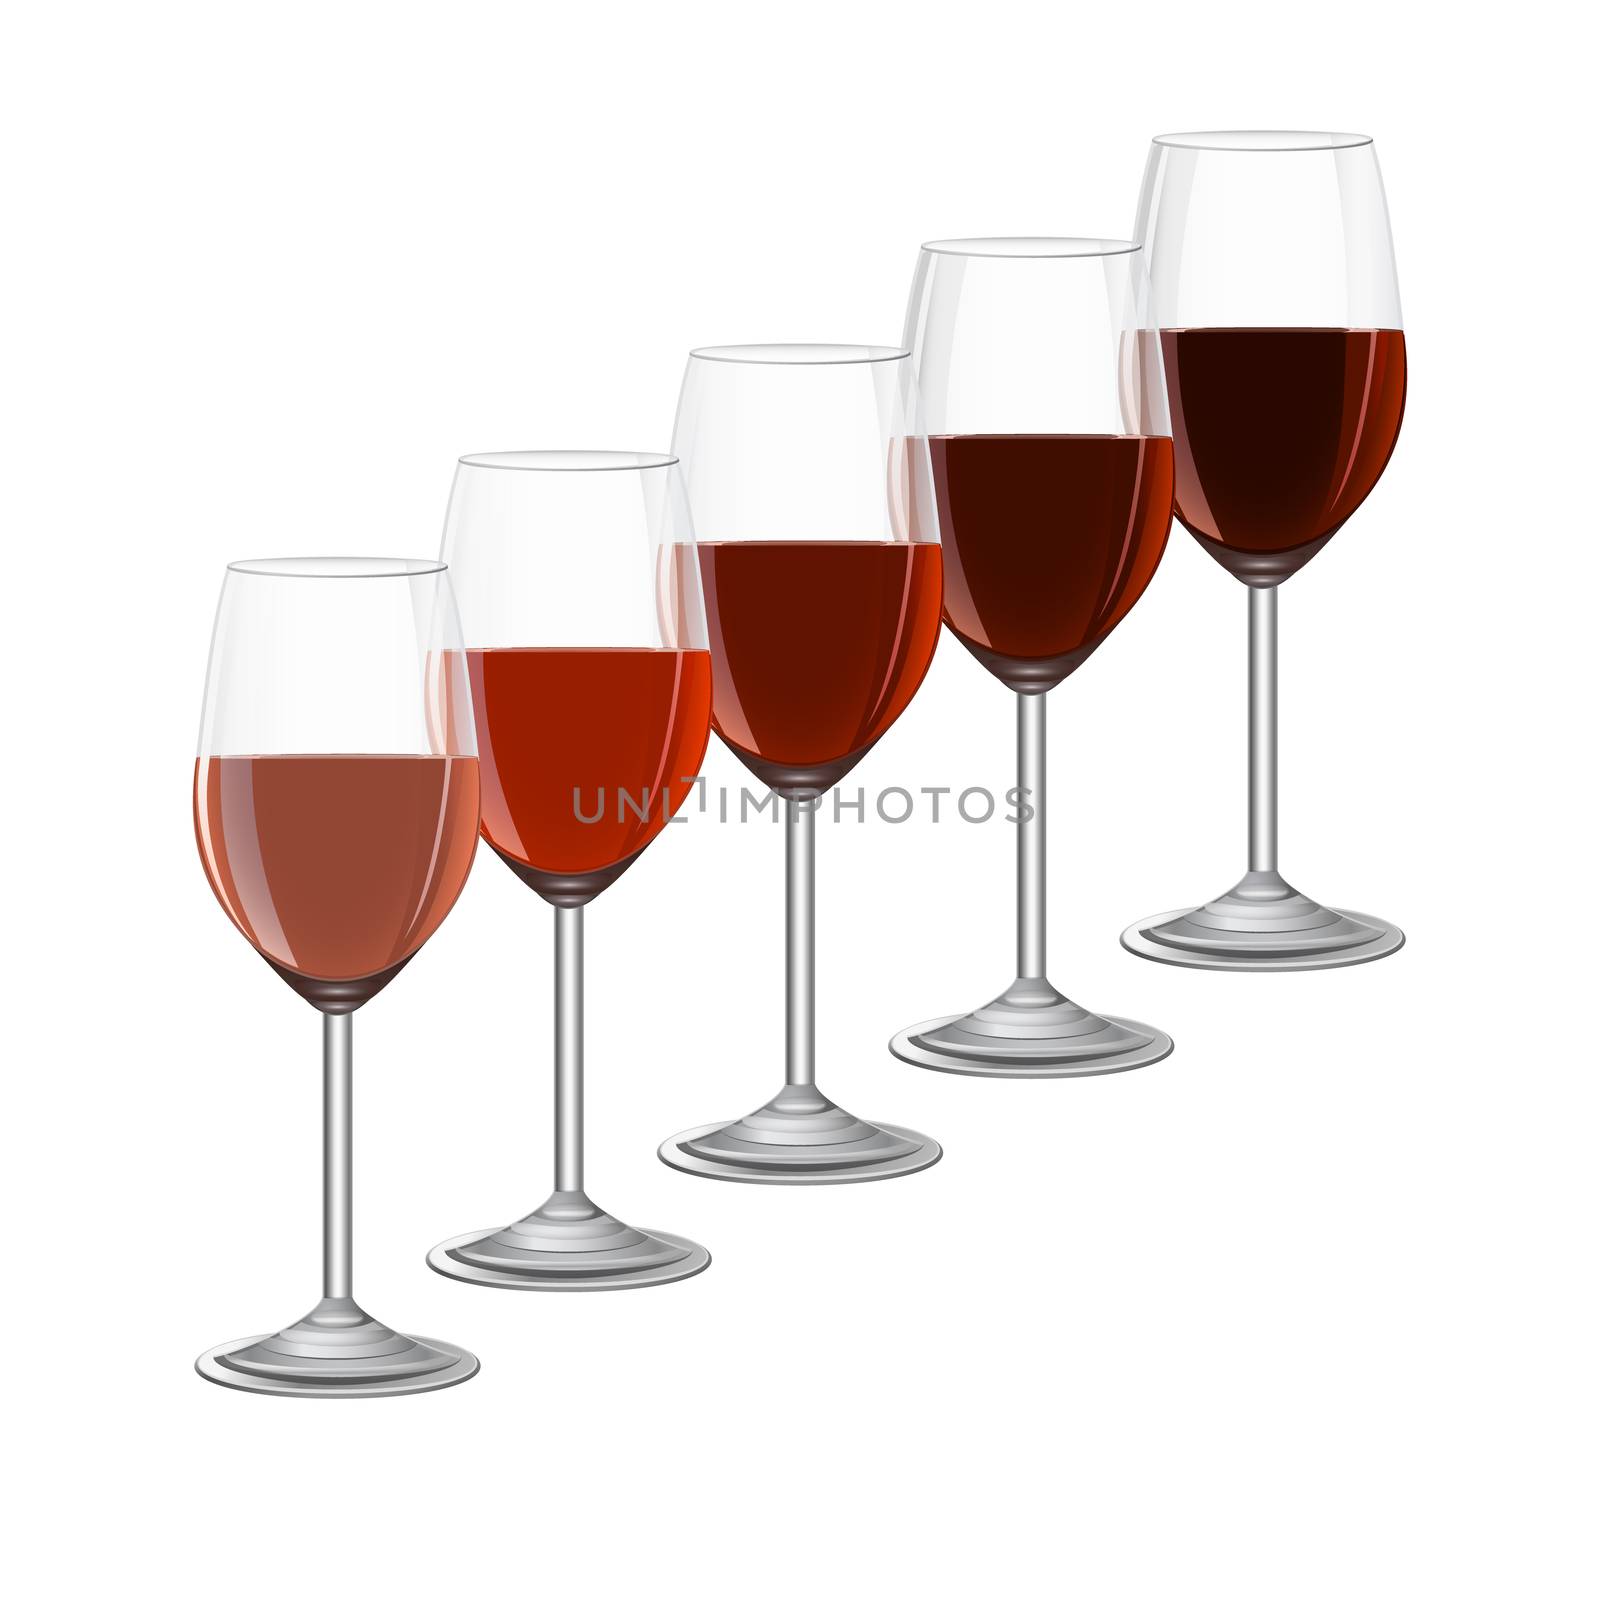 glasses of wine on metal stand isolated on white backgroud.